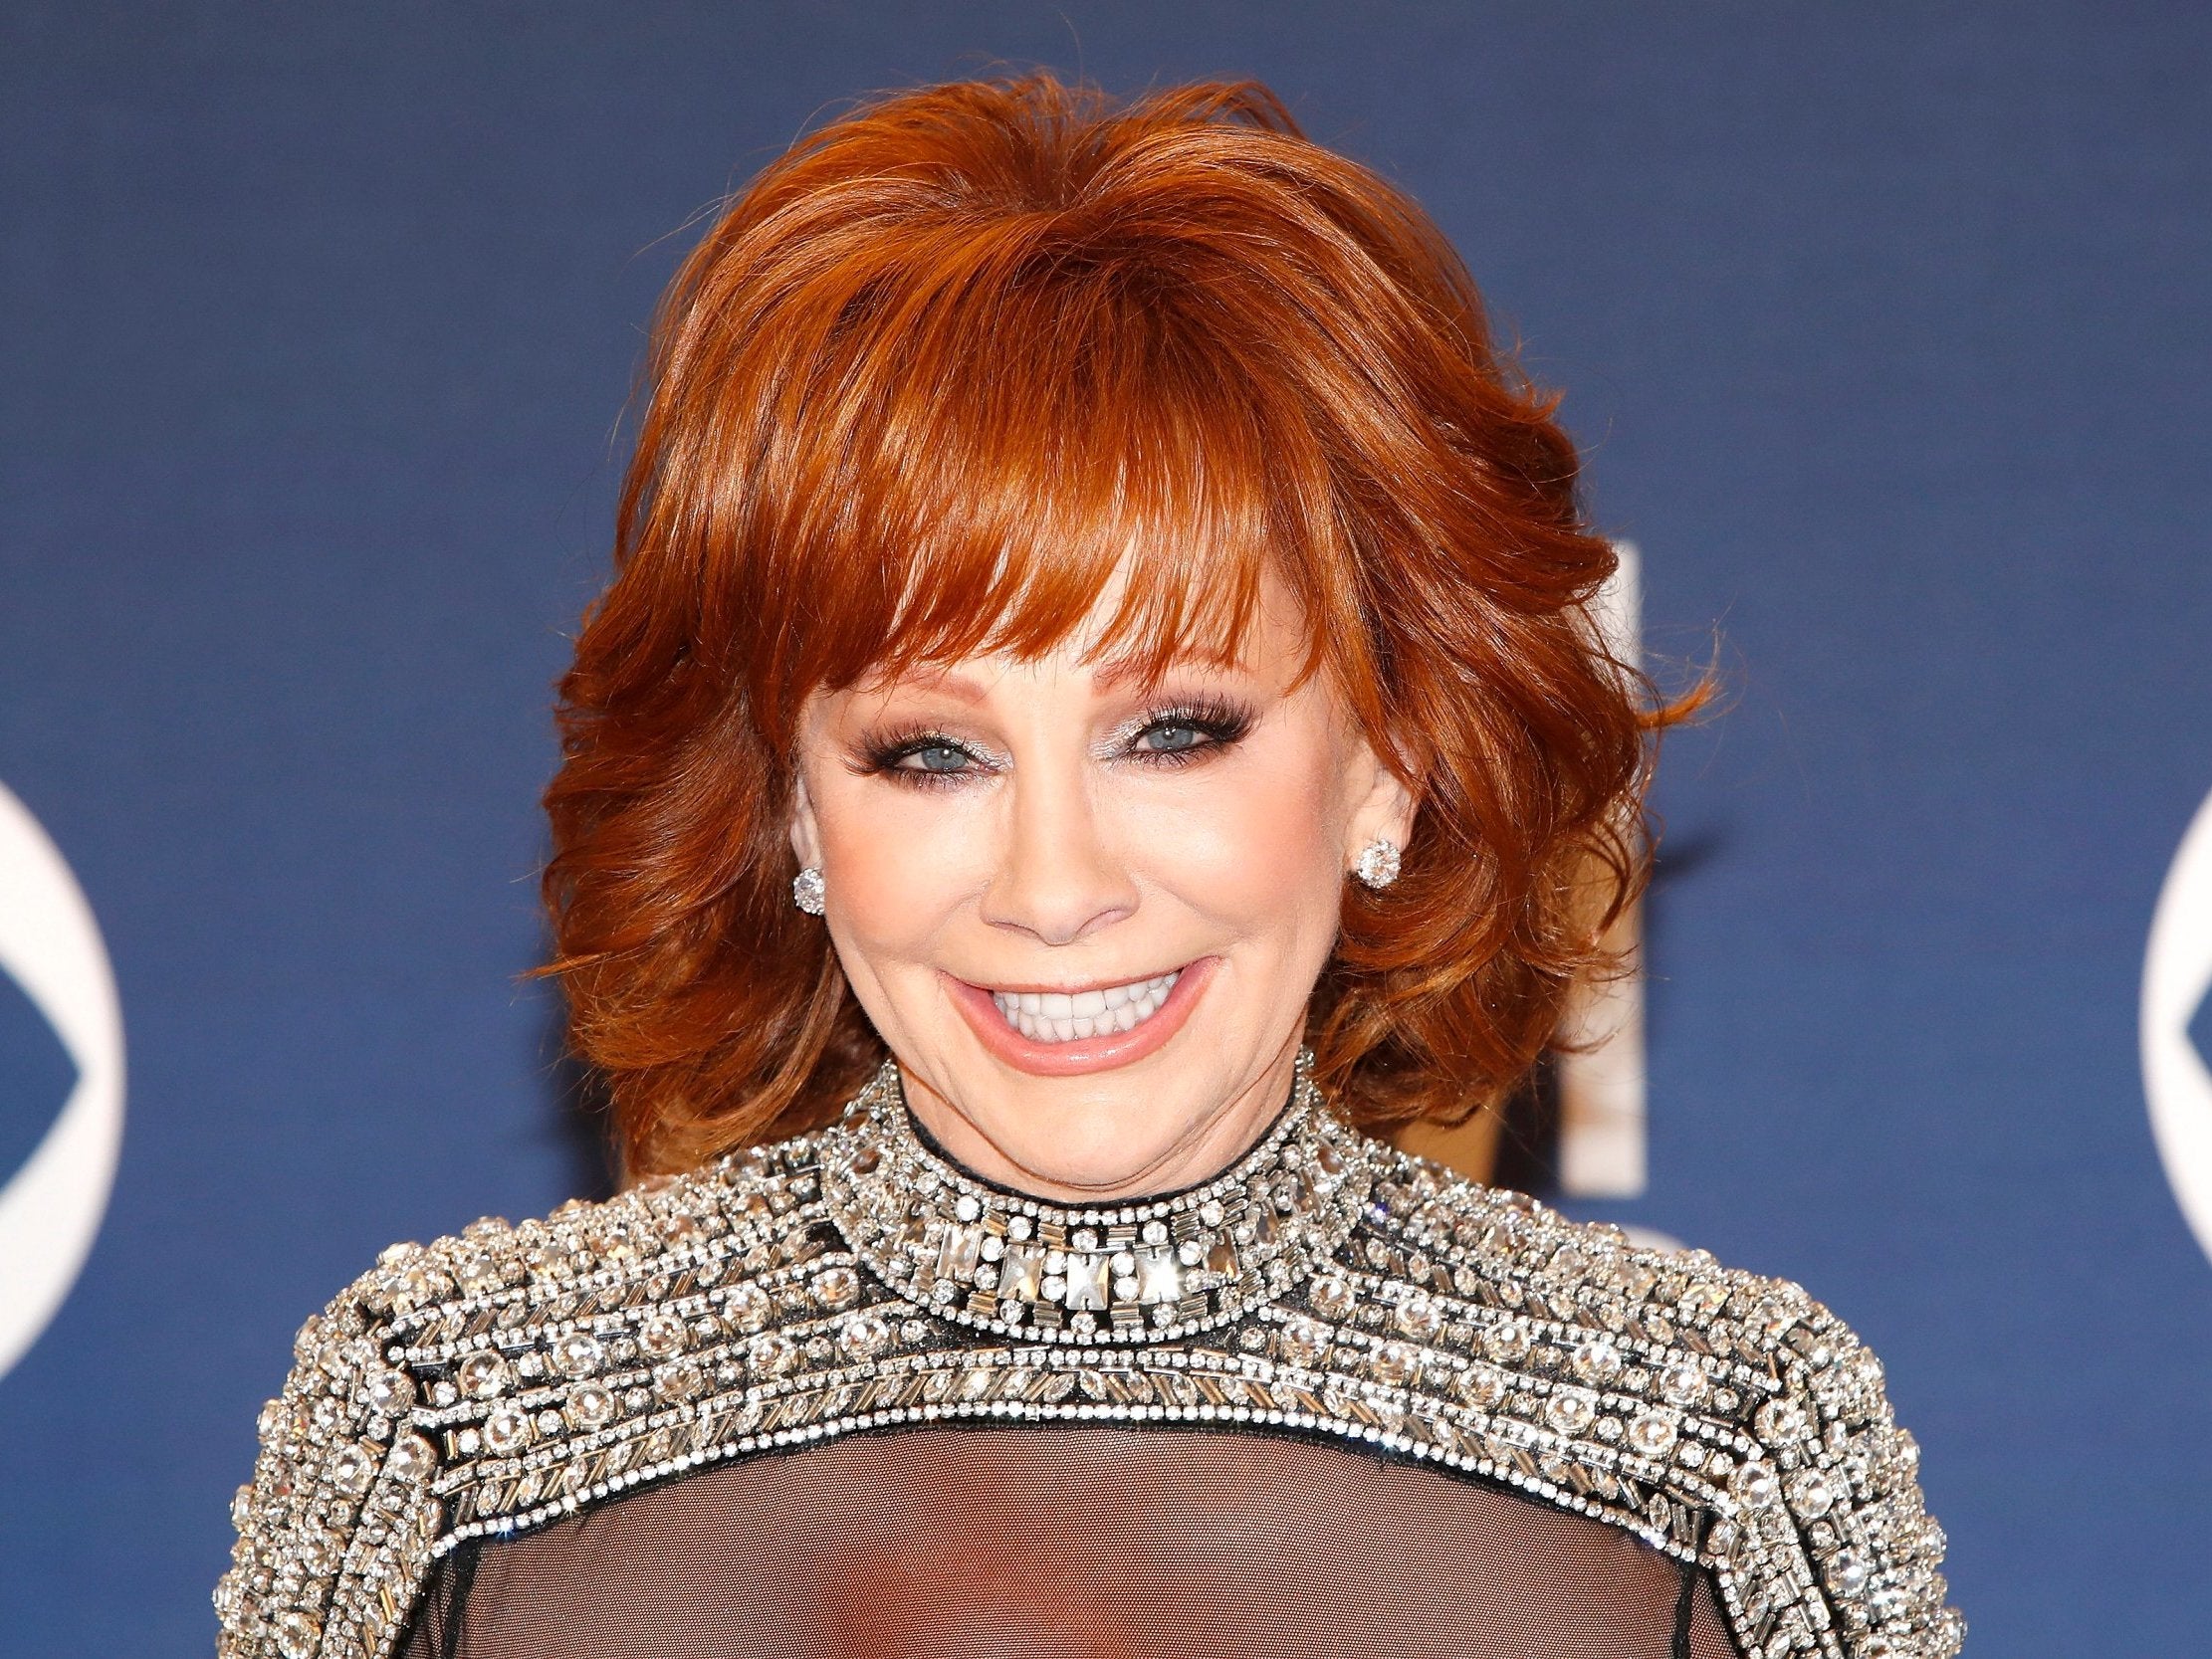 Nude pictures of reba mcentire